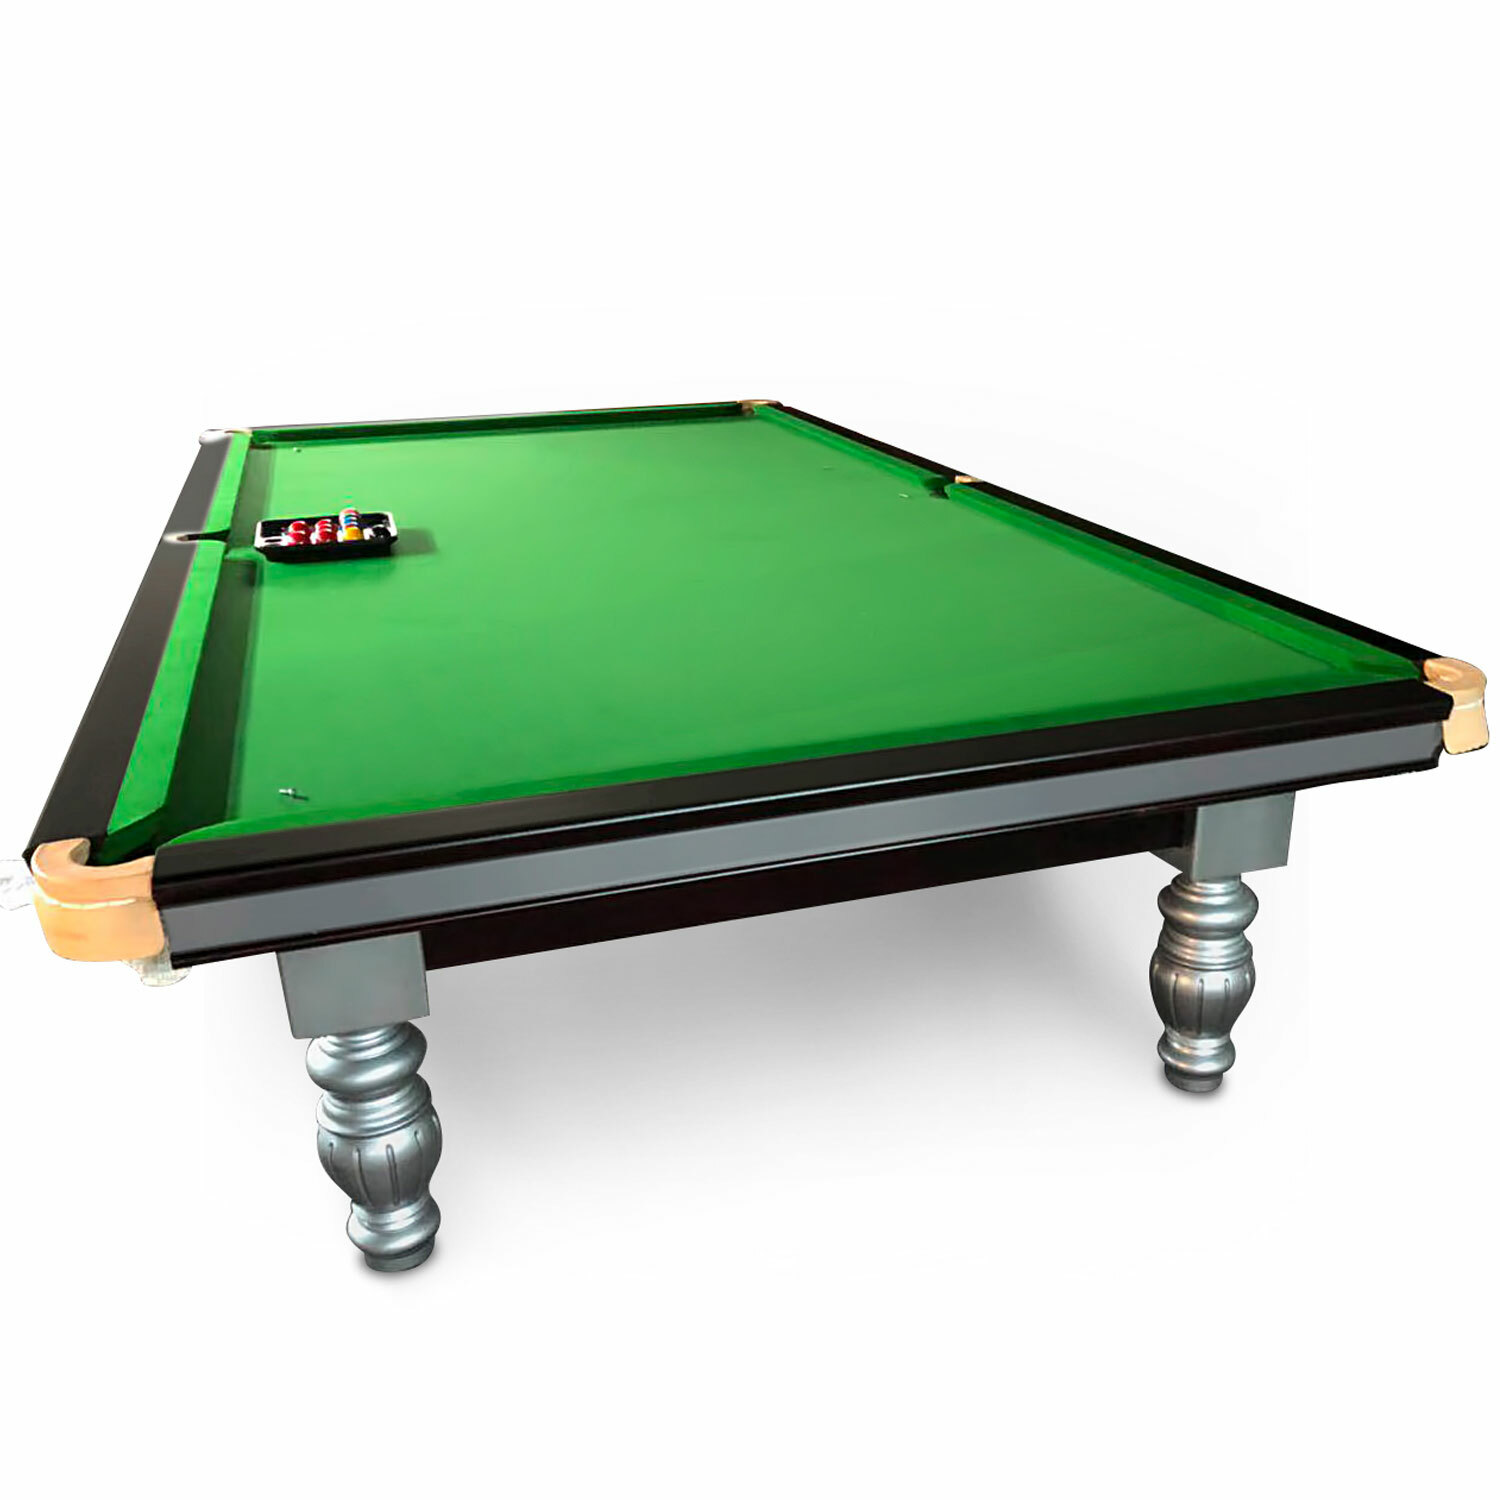 10 Foot Slate Windsor Snooker Table - Timber cushion